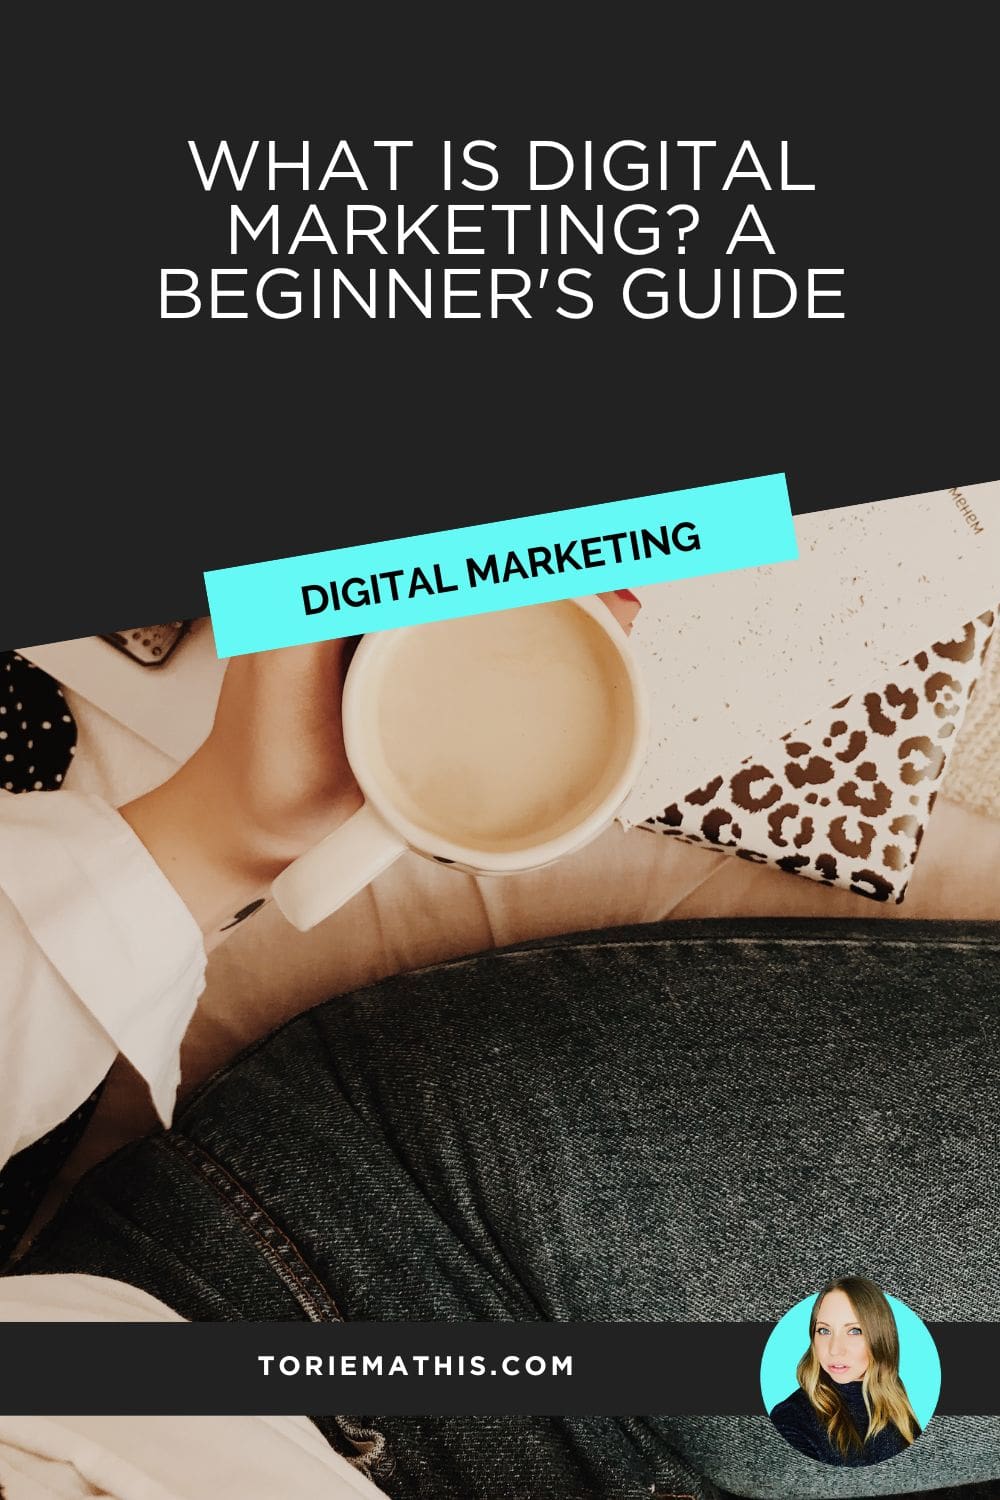 What Is Digital Marketing? A Beginner's Guide